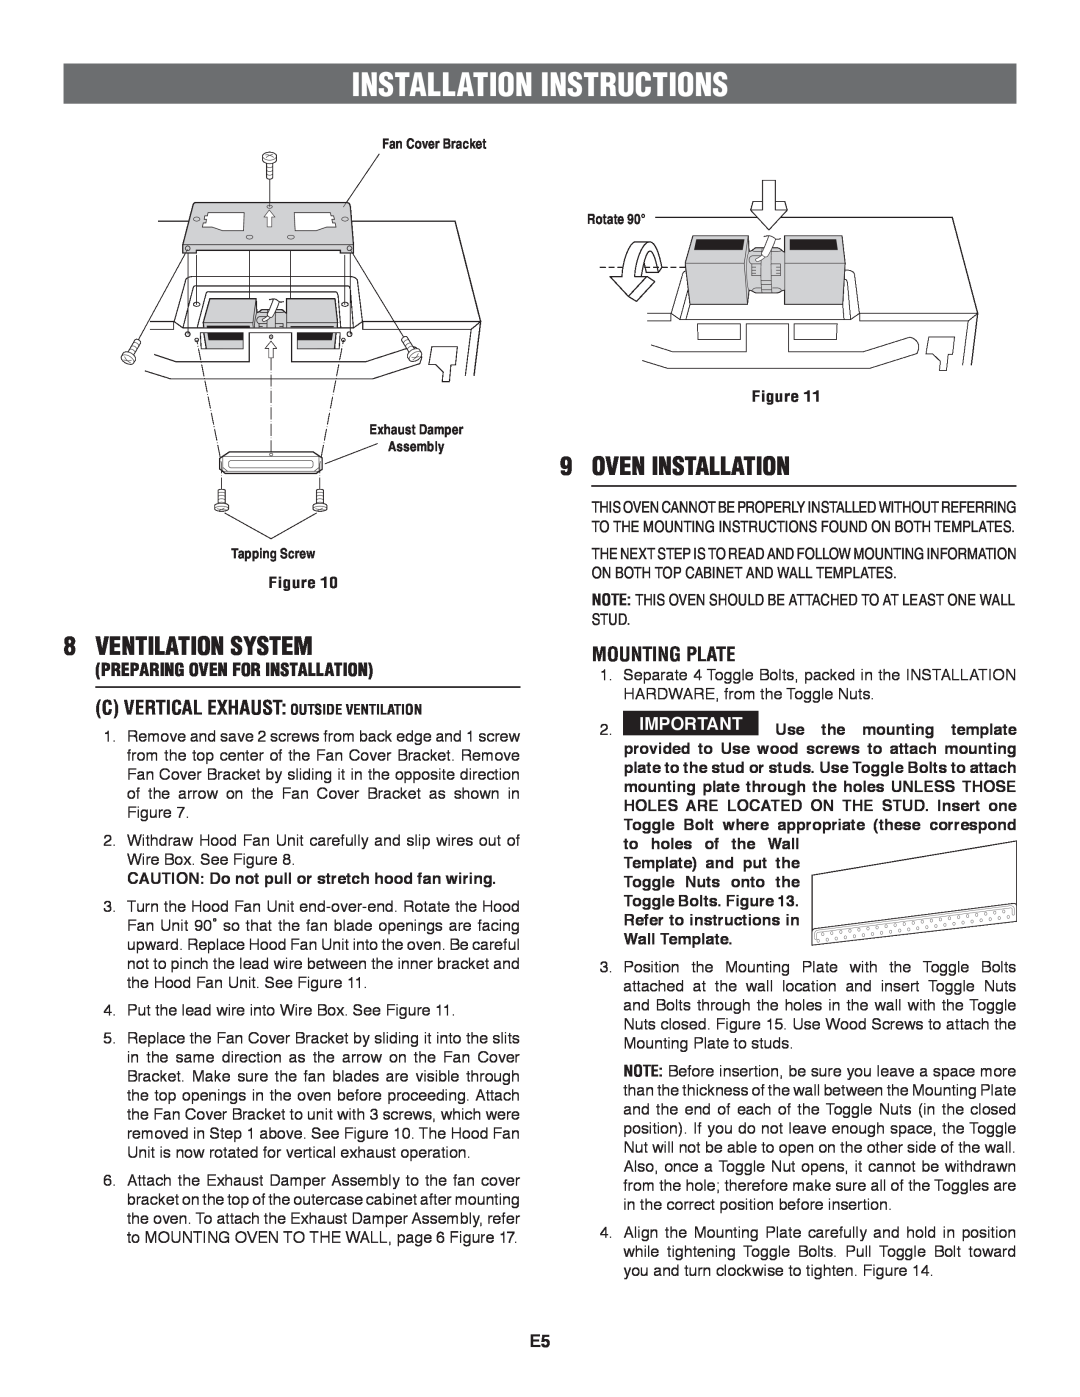 Frigidaire 316137234, TINSEB151WRRZ Oven Installation, Mounting Plate, Installation Instructions, Ventilation System 